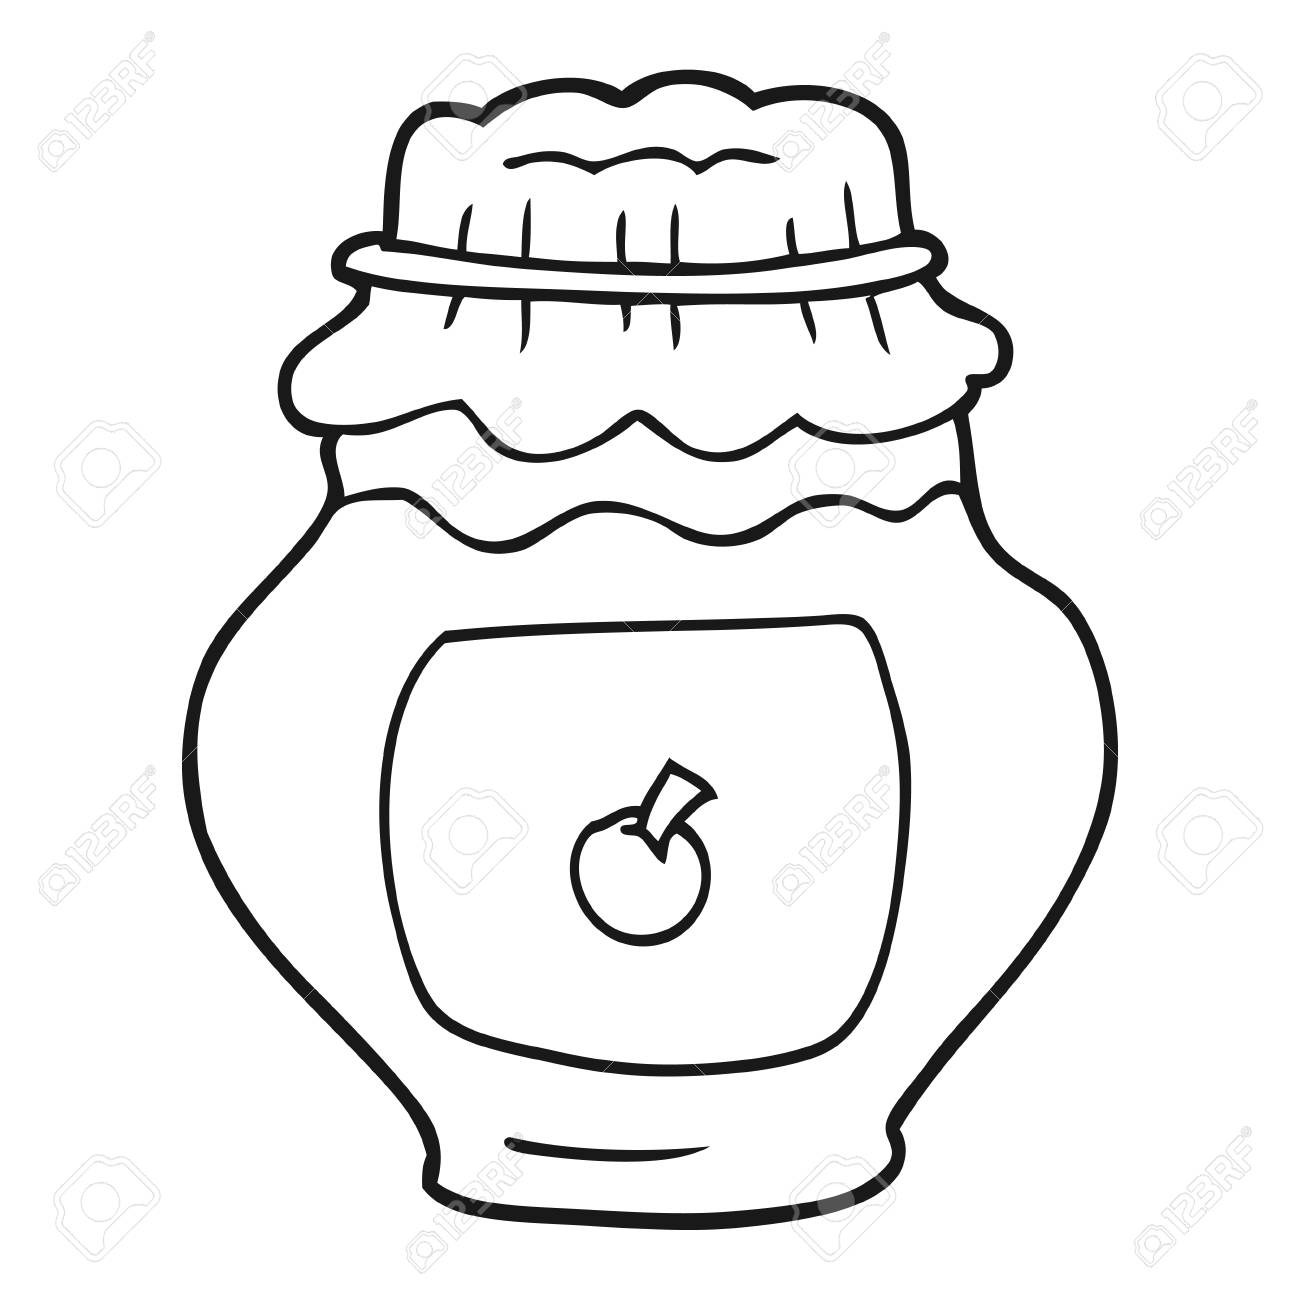 jam clipart drawing